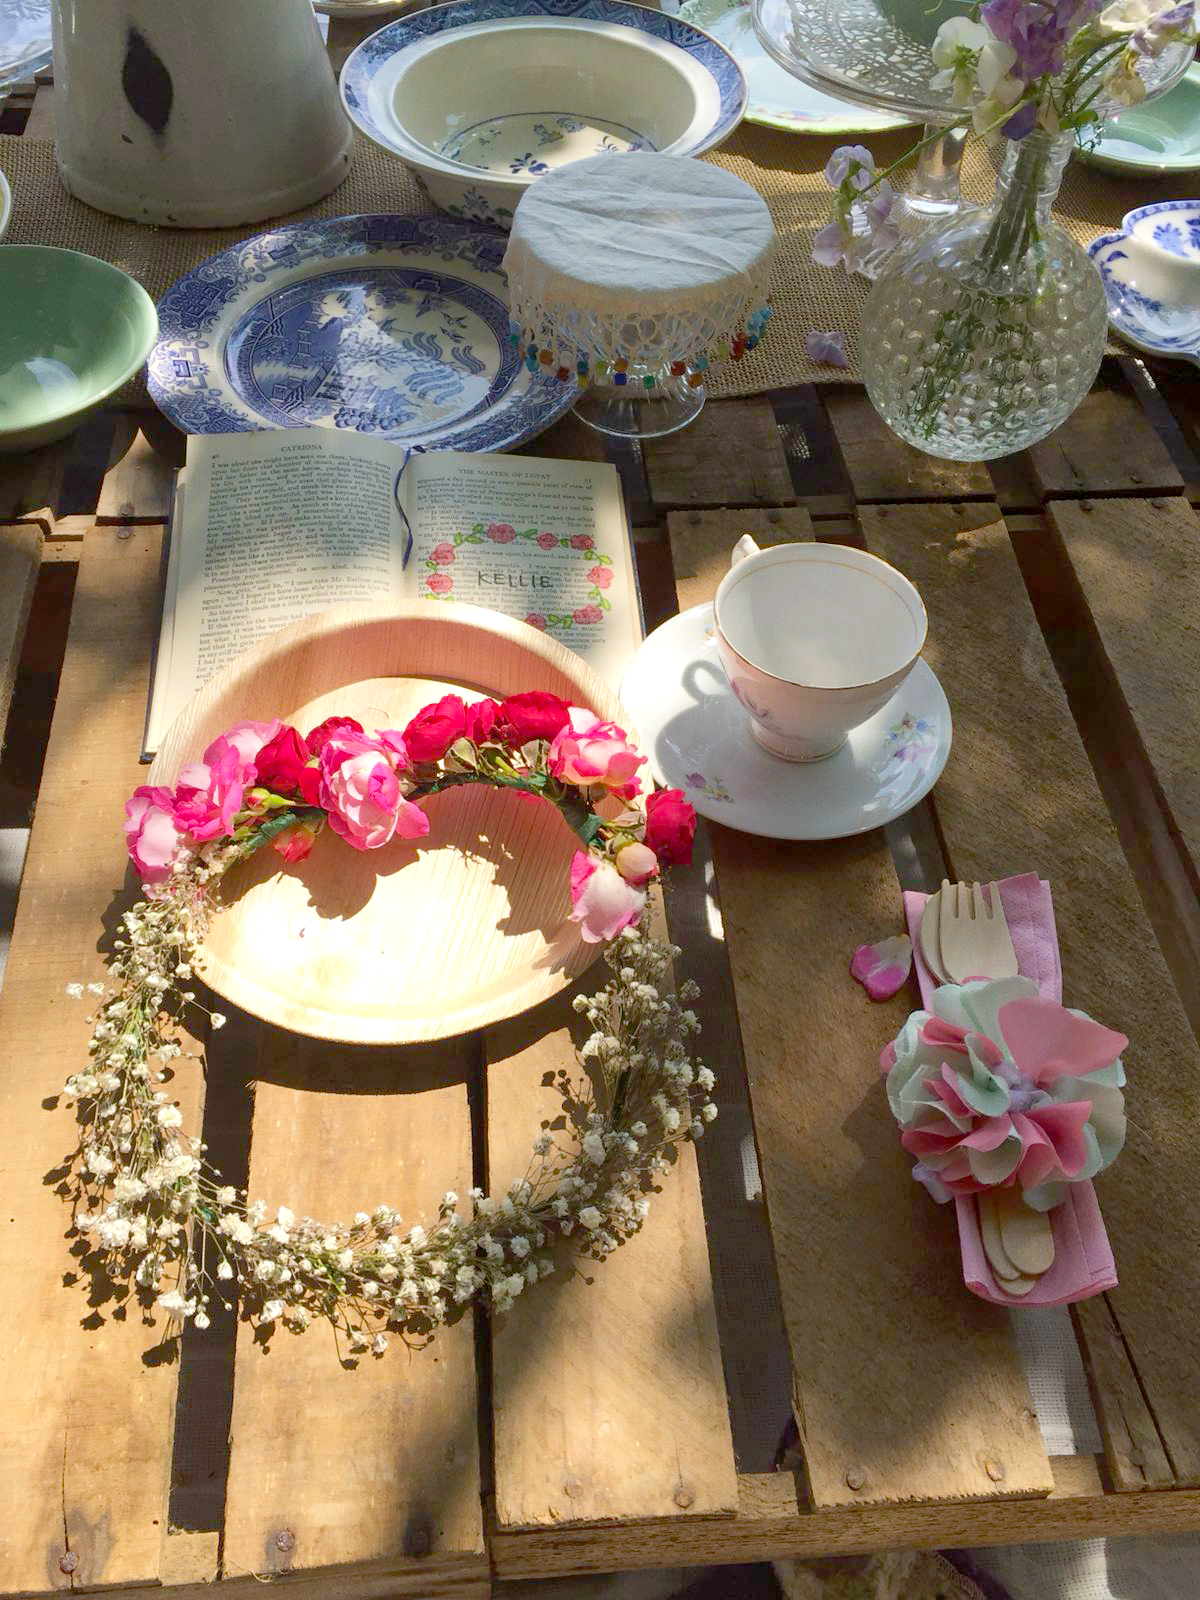 Hen Do Flower Crown and Place Setting with Tea Cup and place name and picnic wares